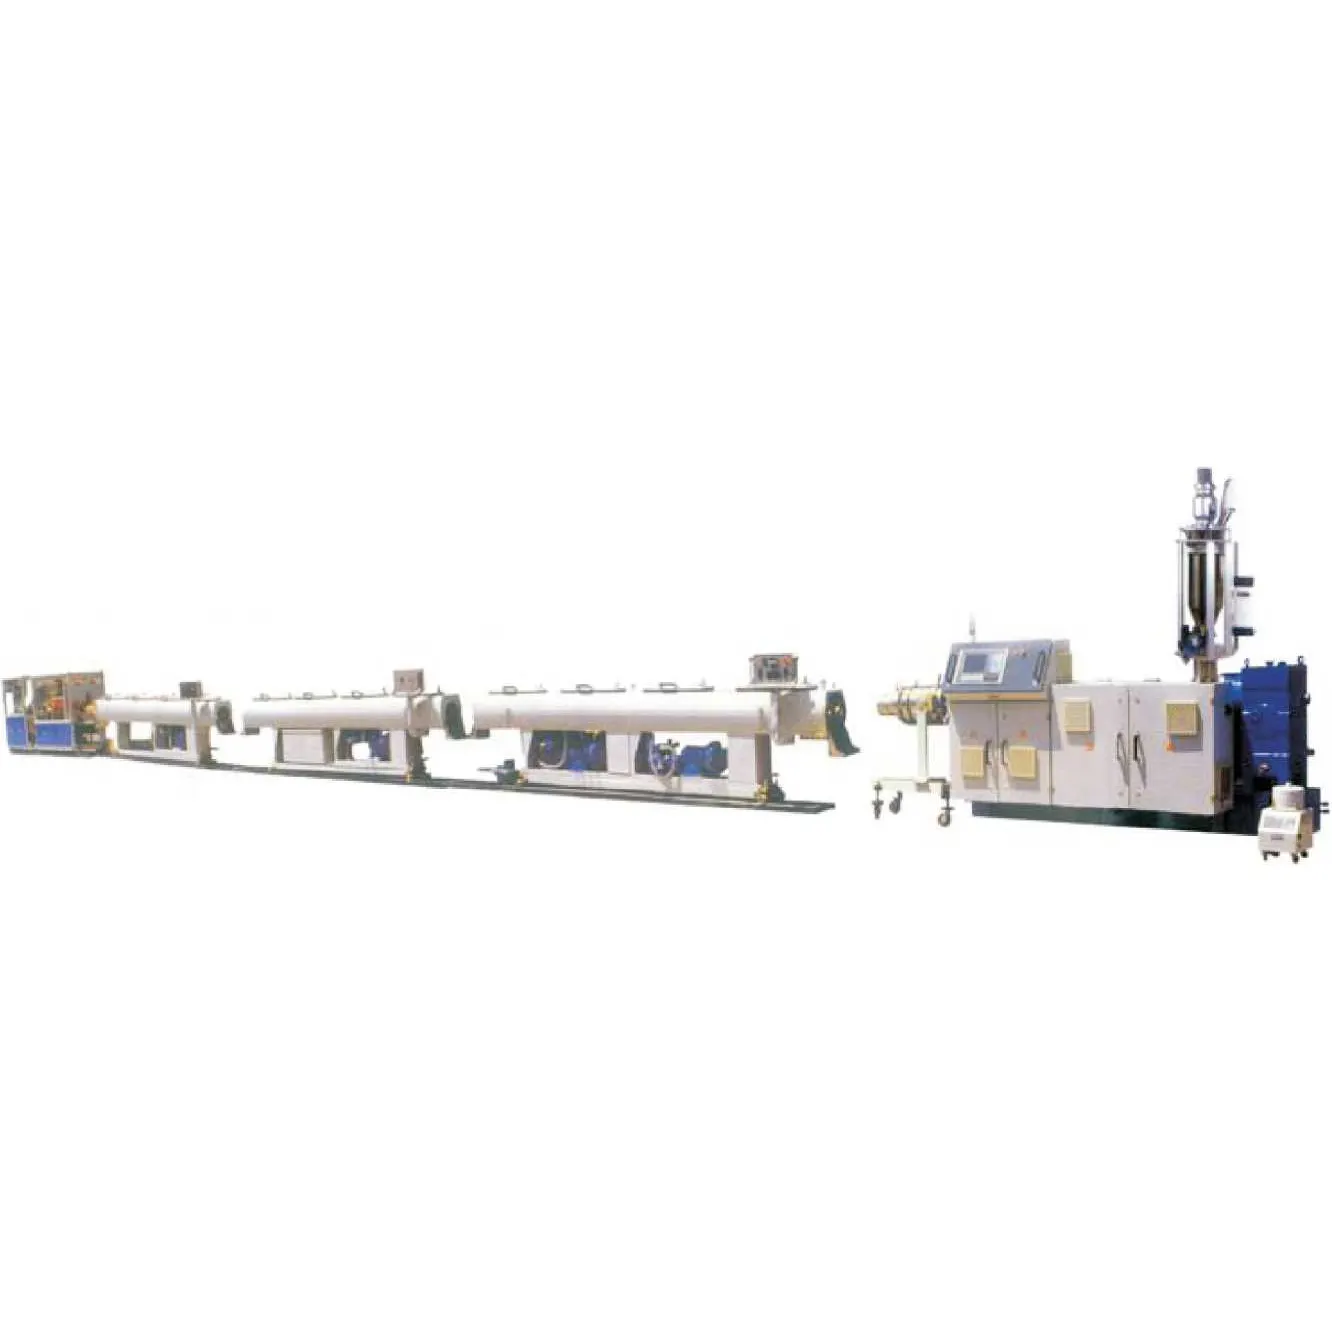 KUNSHAN BONZER HOT sale TOP customized High-speed PPR.PPH.PPB.PEX.PE-RT pipes machine machinery of extrusion lines extruder PVC